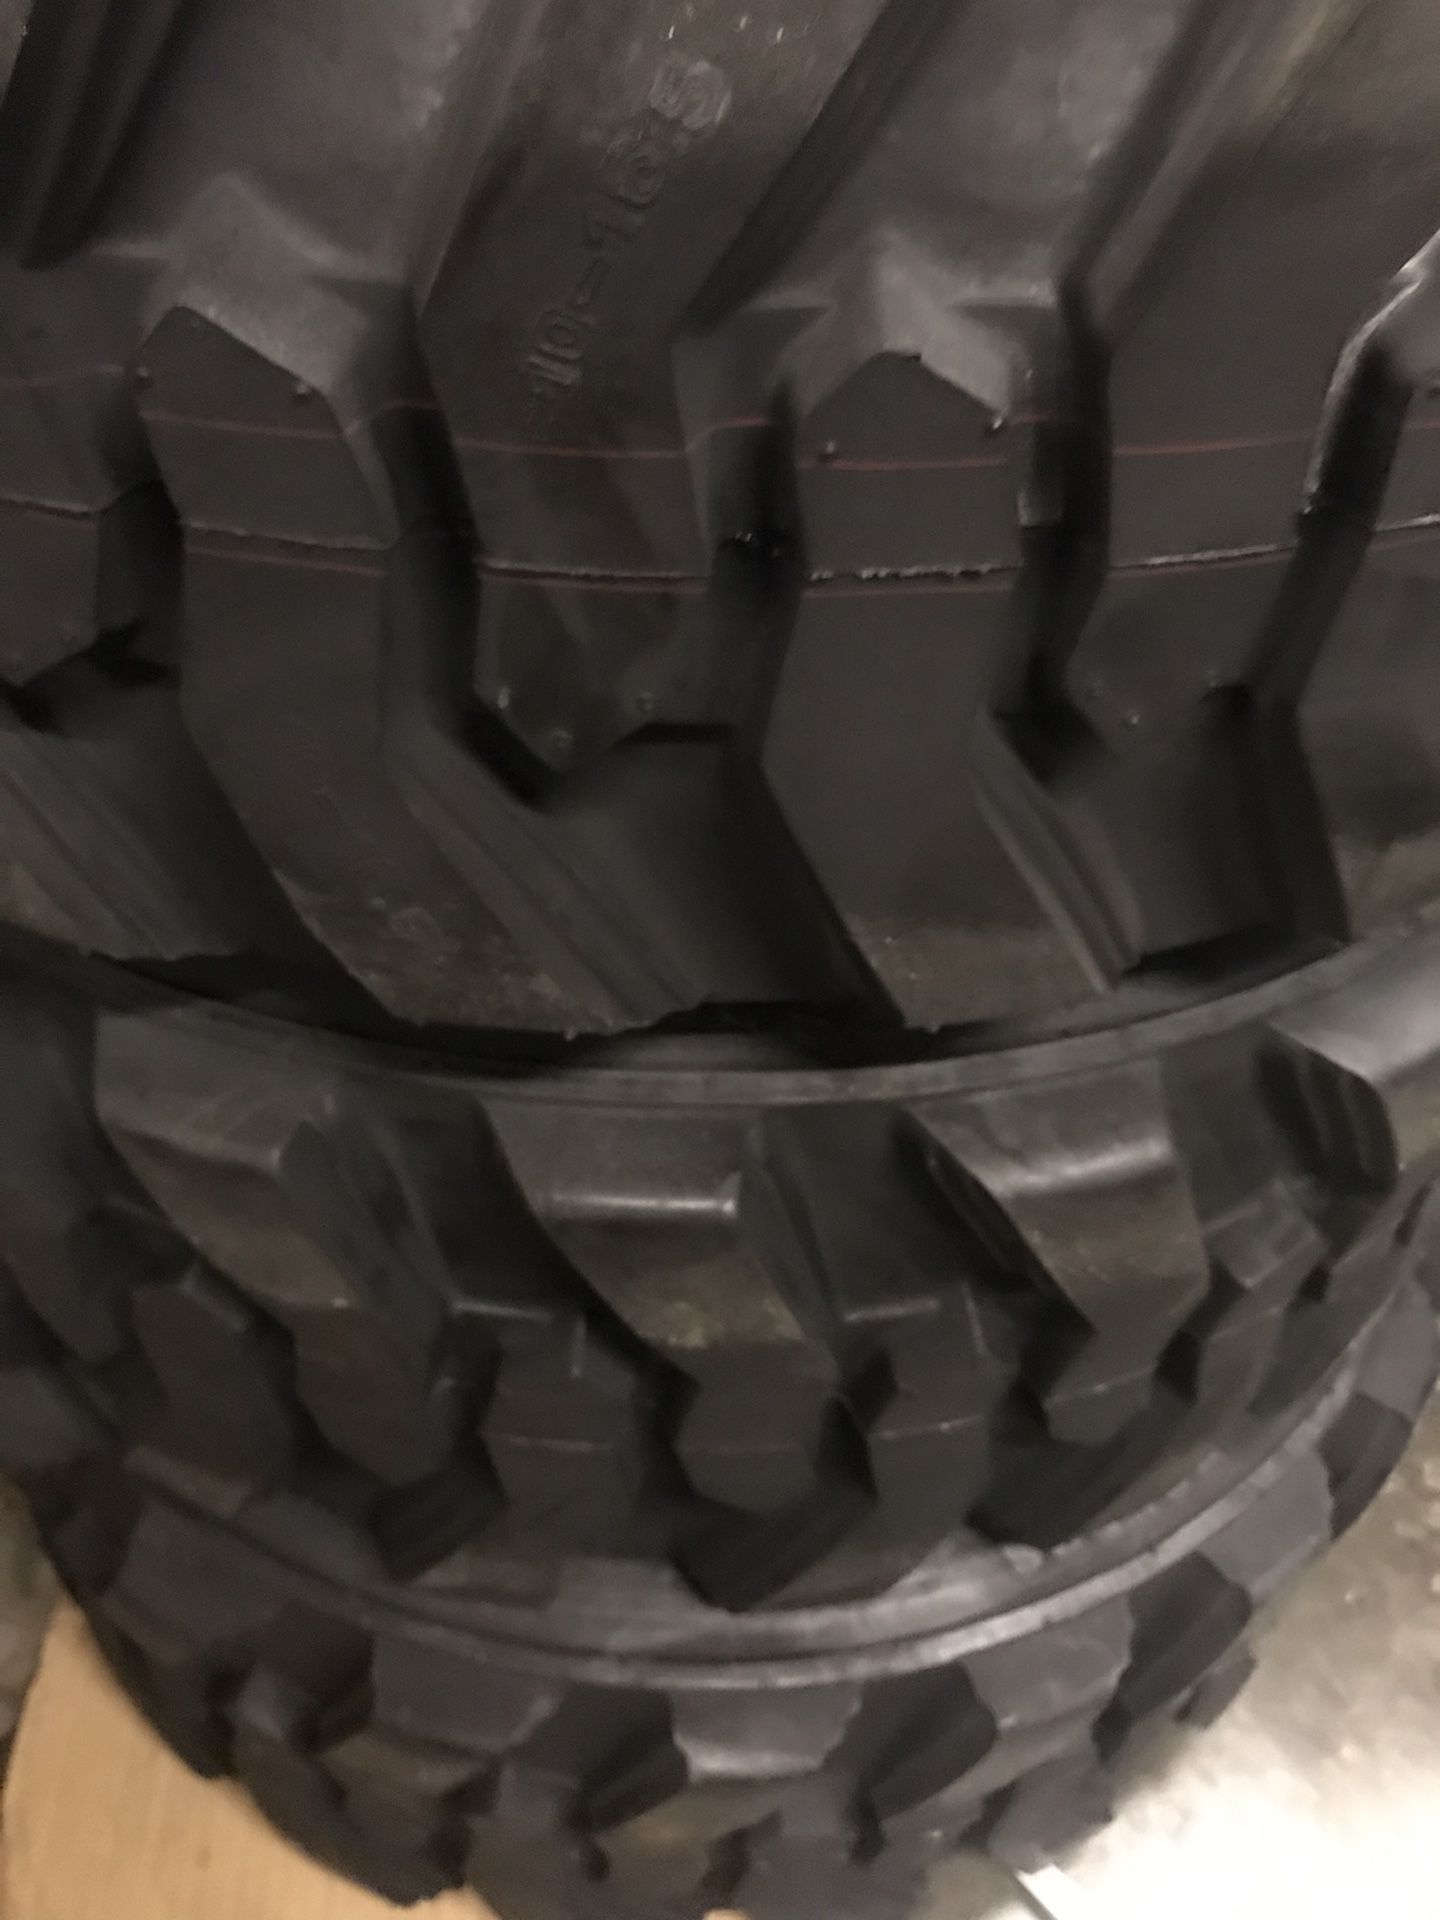 4x 12-16.5 14ply skid steer tires $650 cash no lowball